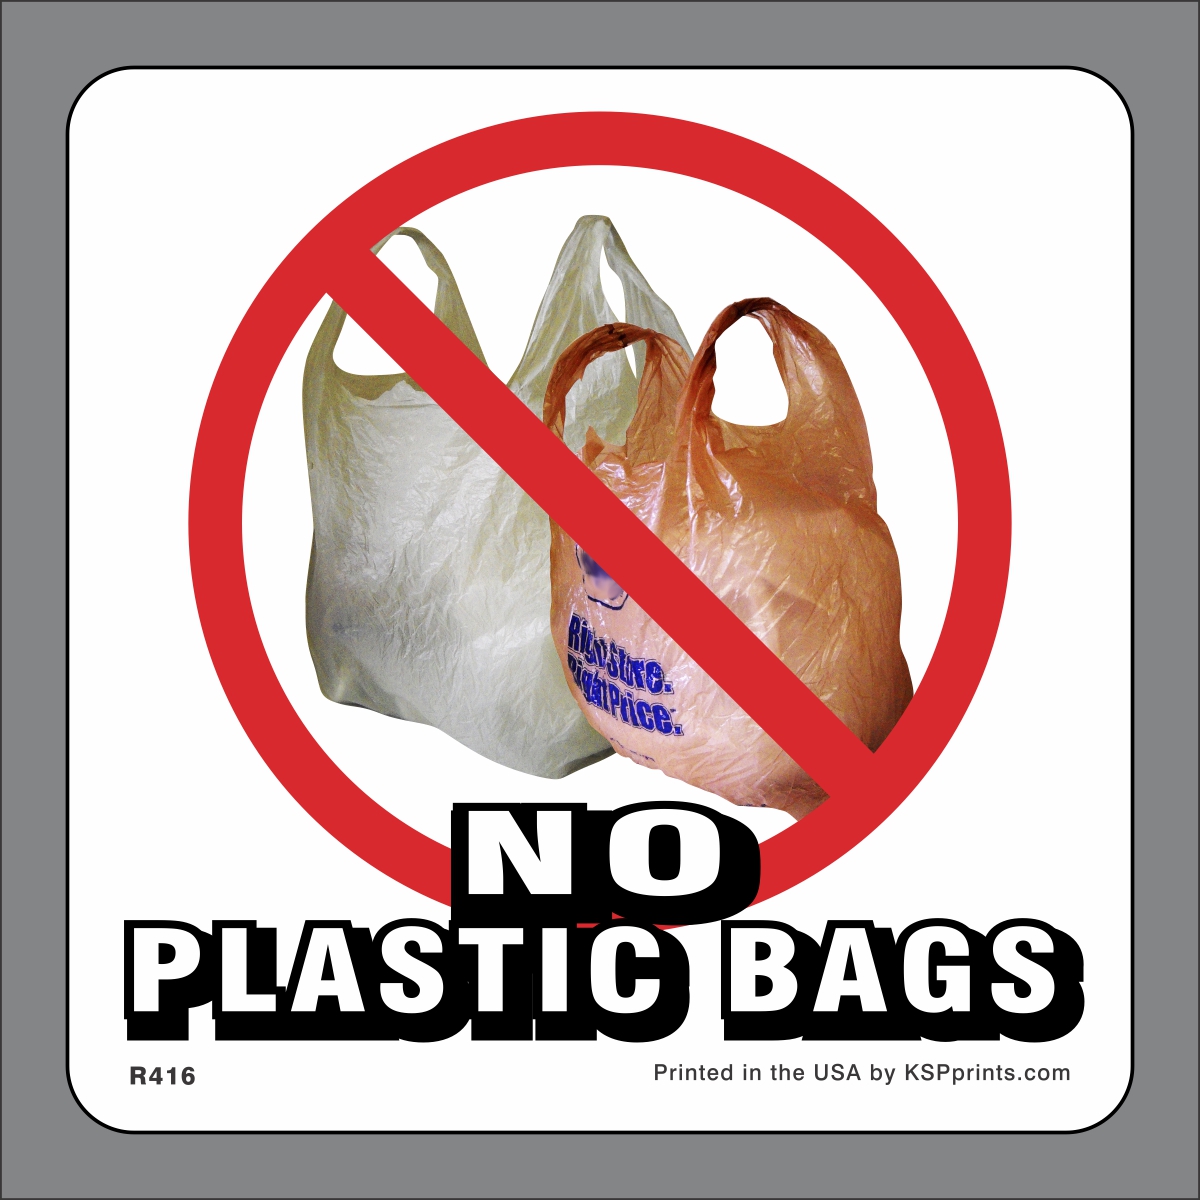 rinse To detect Disgraceful Small No Plastic Bag Stickers to Keep Plastic Bags out of. Your Container.